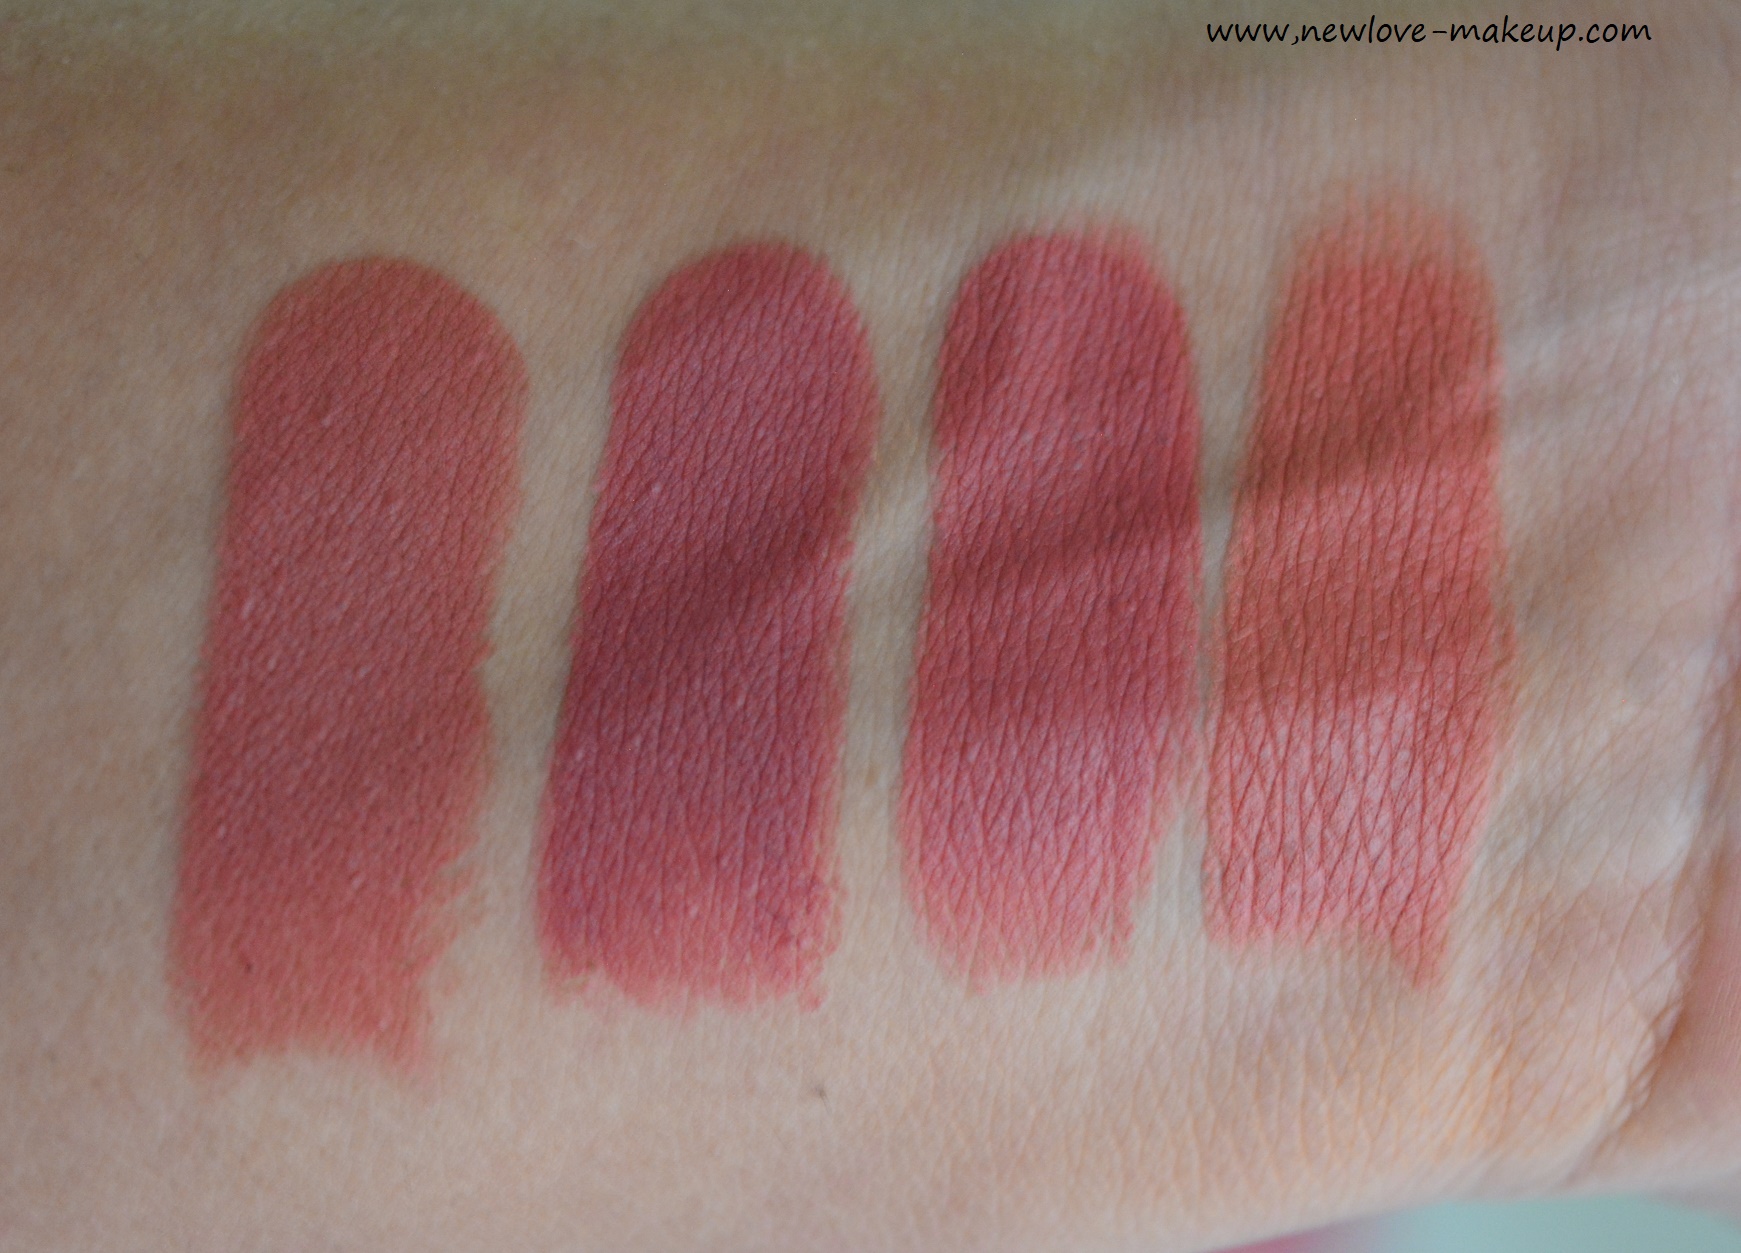 PAC New Launches, Soft Matte Lipsticks Review, Swatches + Giveaway